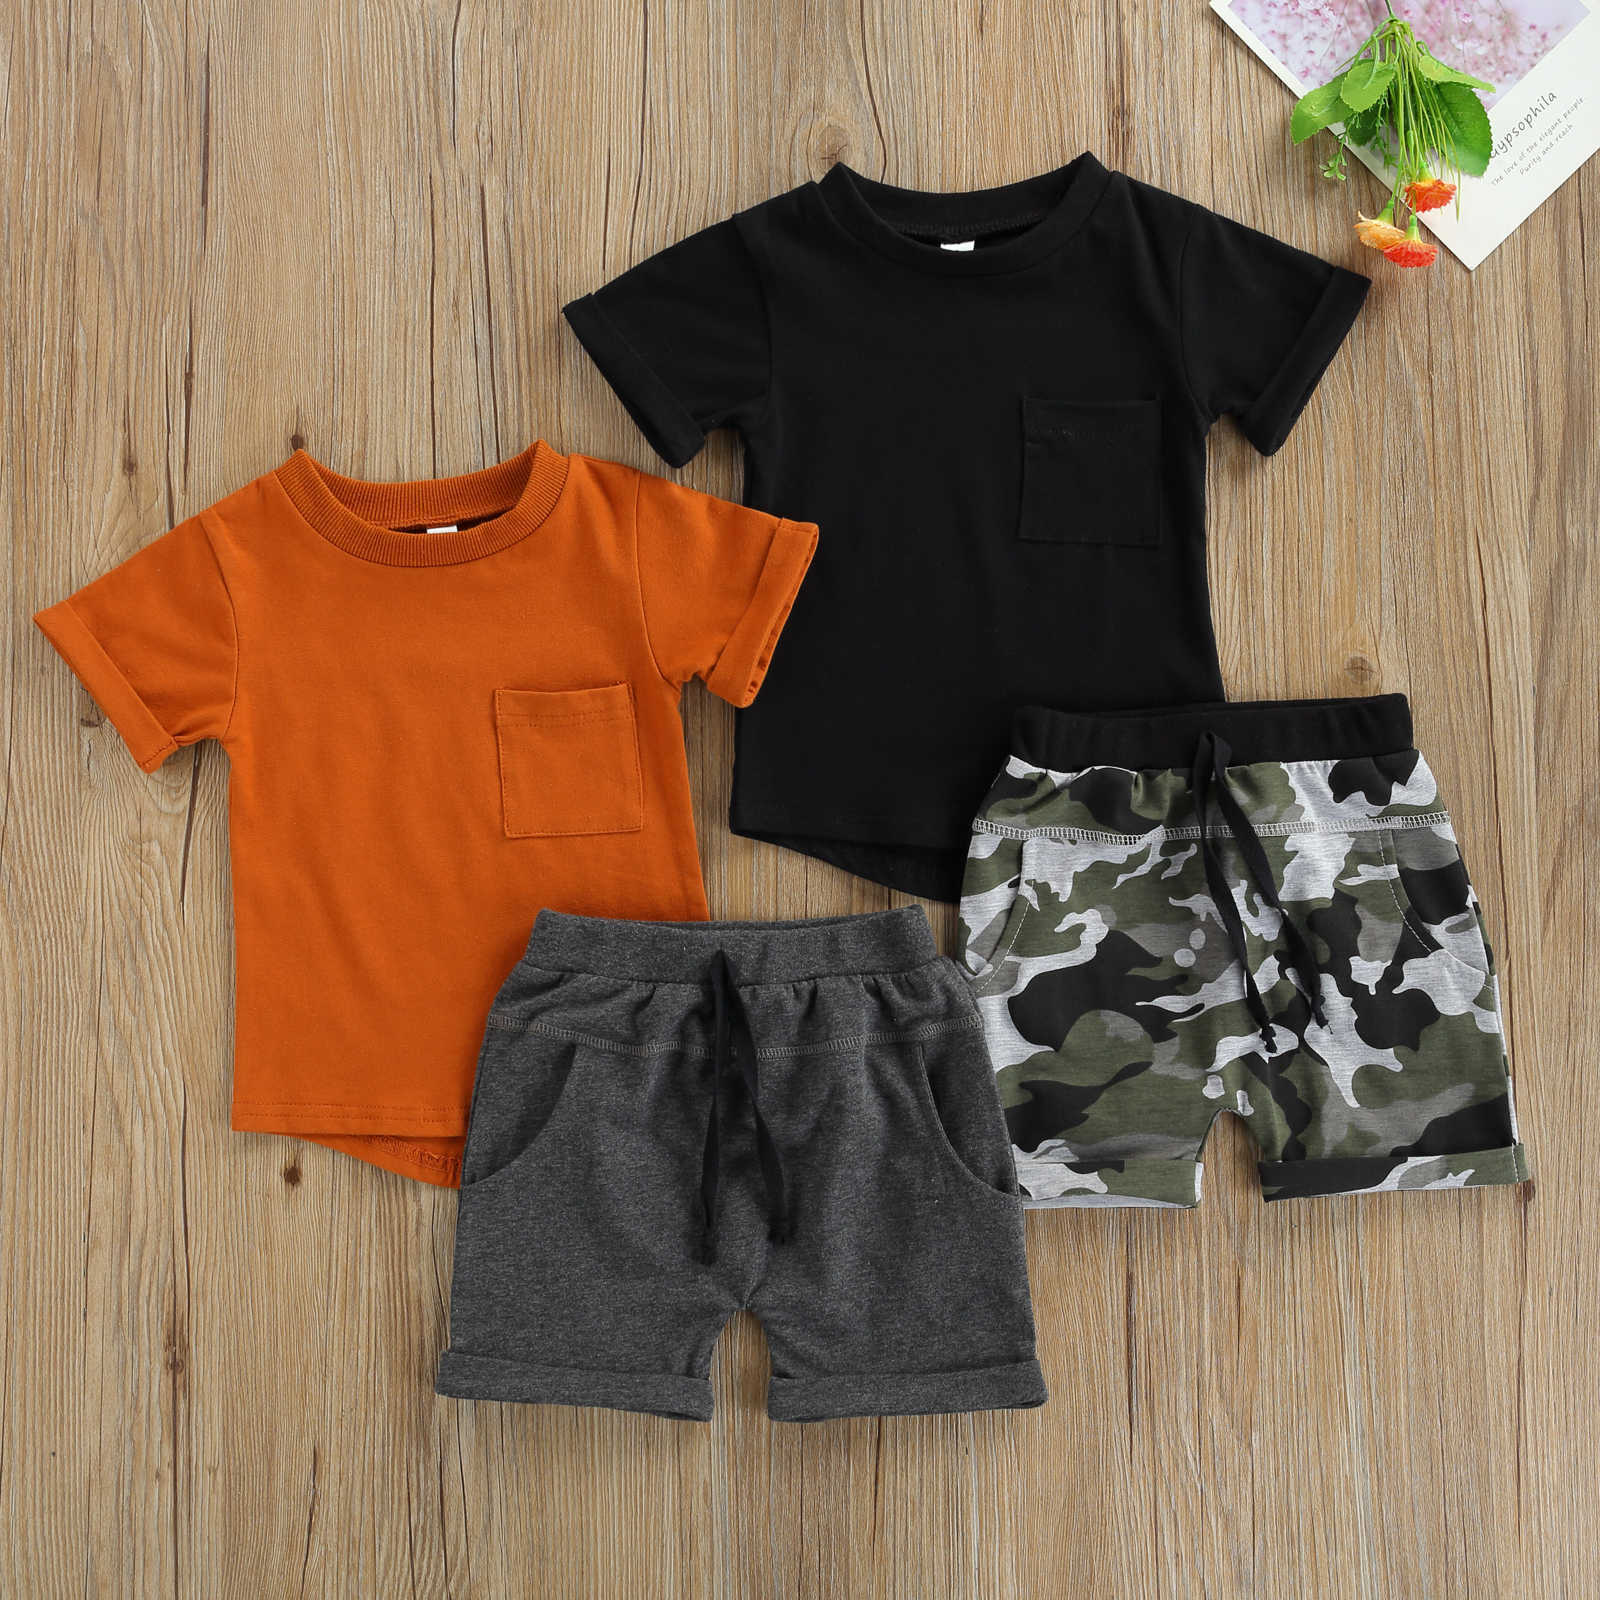 Clothing Sets Pcs Summer Casual Little Boys Outfits Suit Toddlers Round Collar Short Sleeve Pocket TopCamouflage Printing Shorts Clothes Set